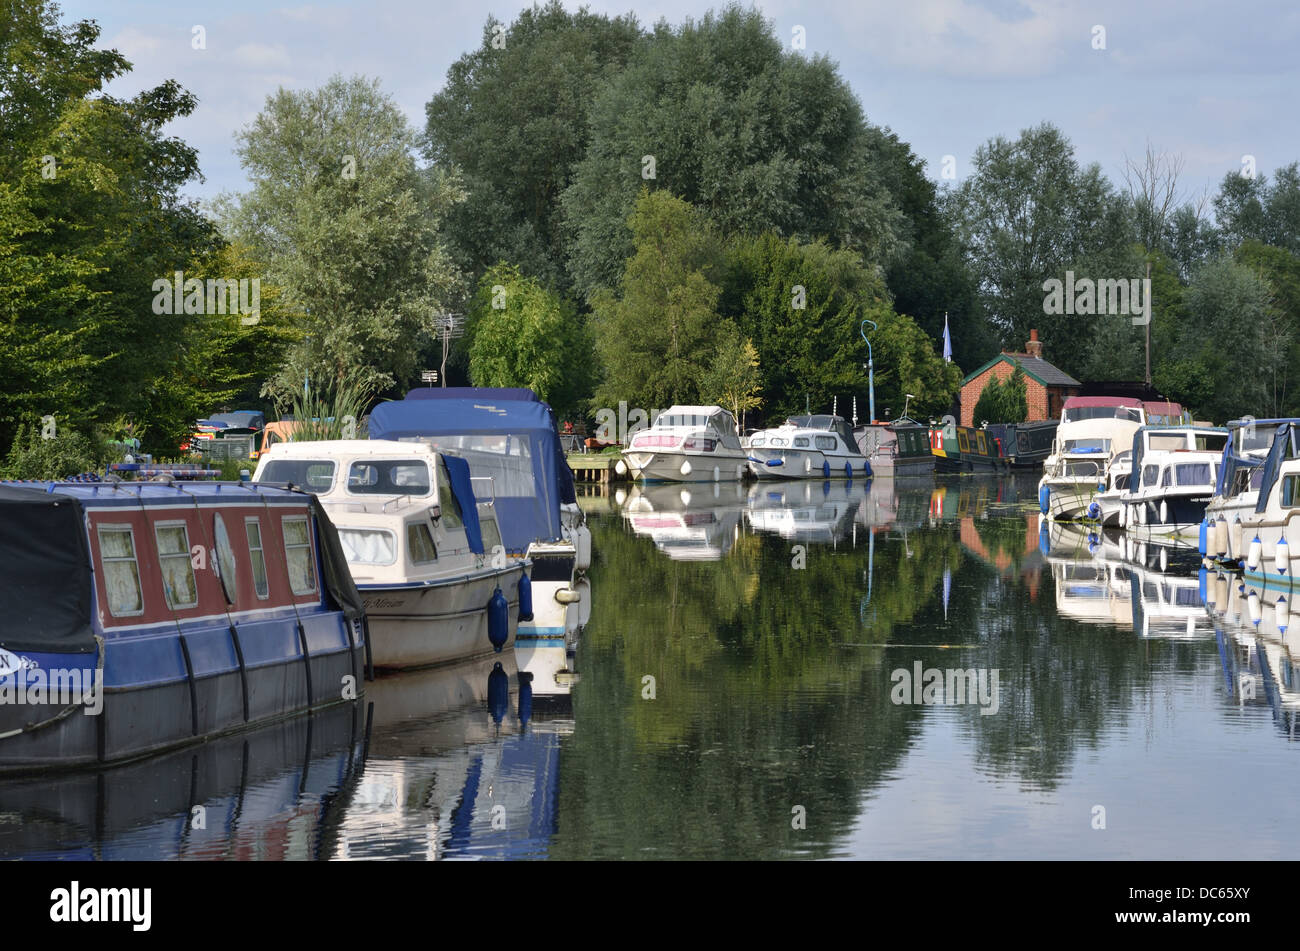 rows of canal boats Stock Photo